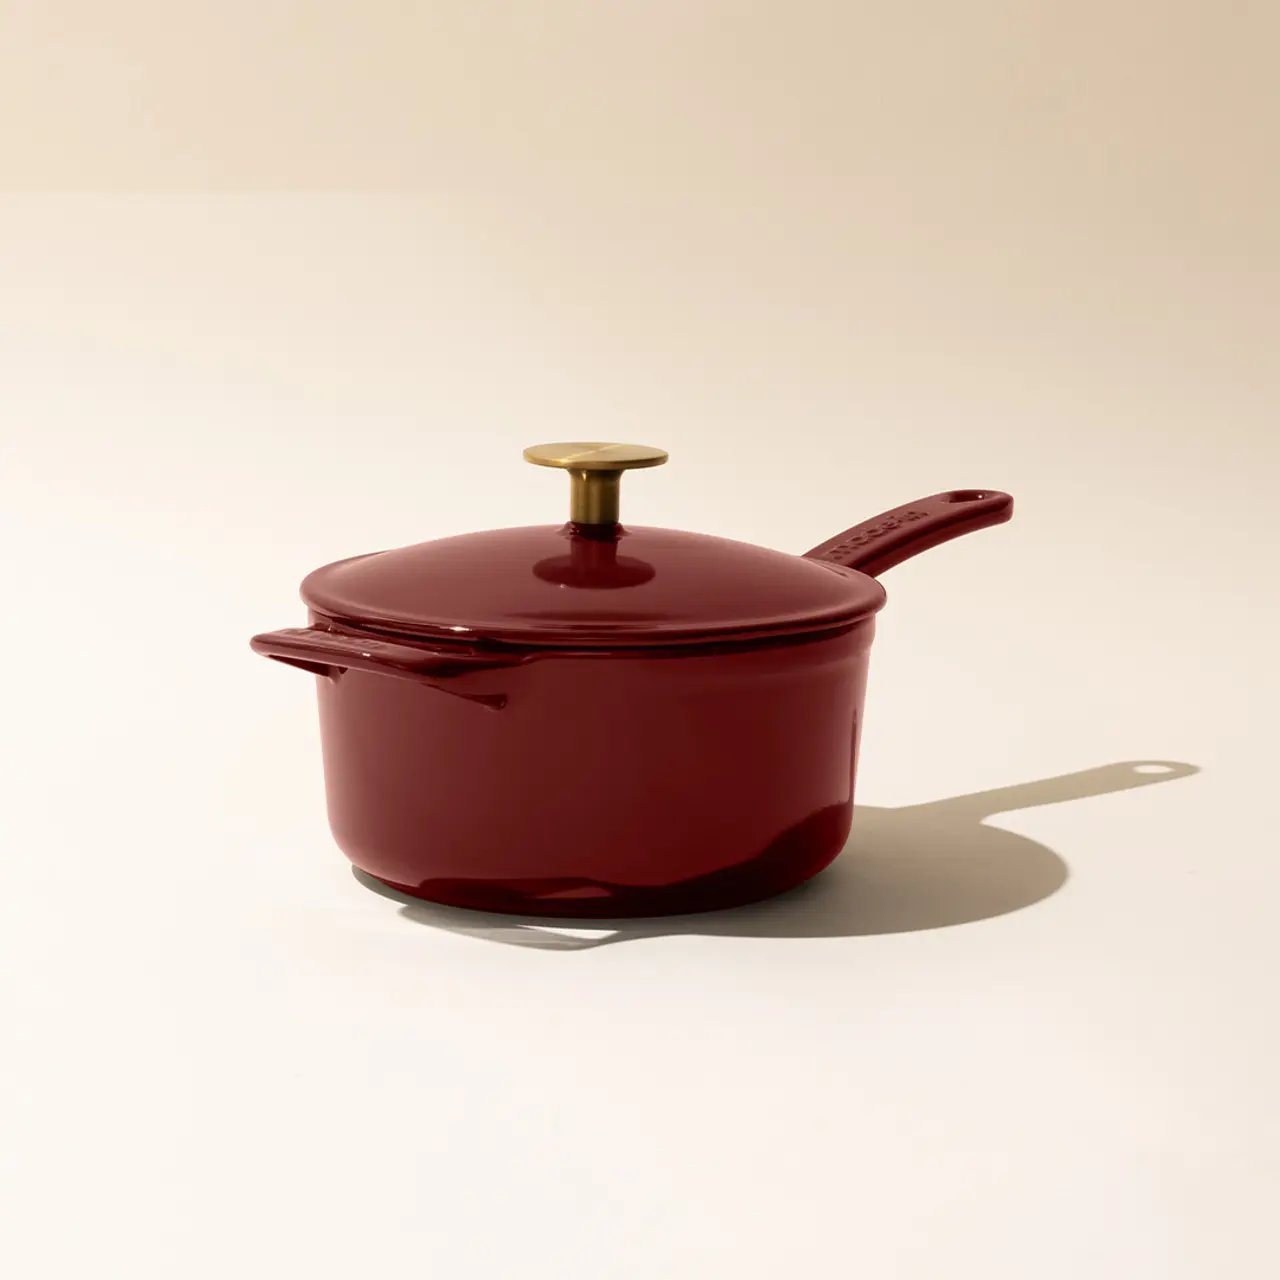 A burgundy saucepan with a gold-tone handle and a matching lid against a neutral background.